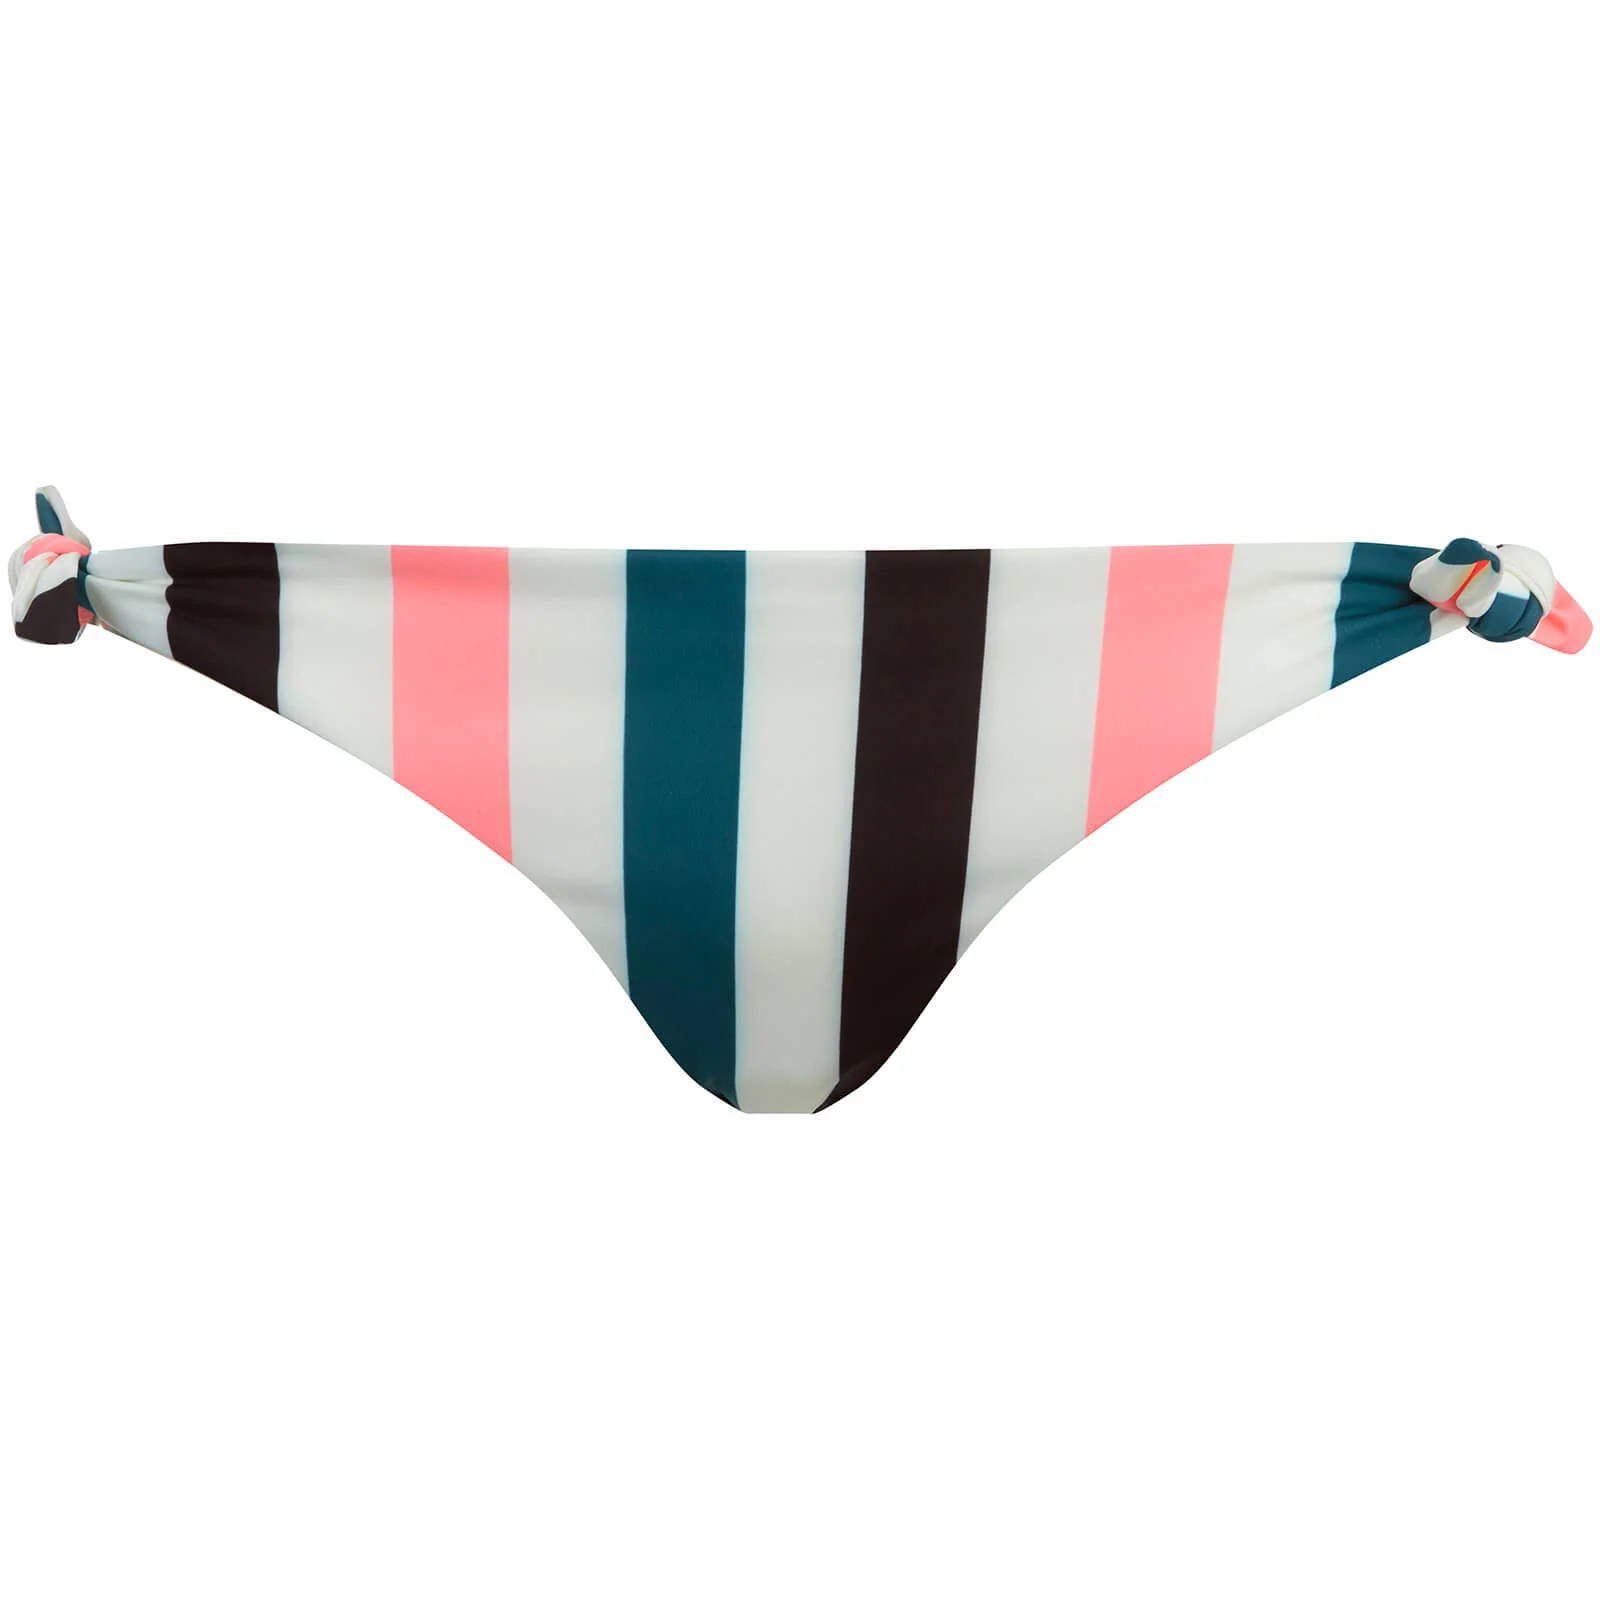 Solid & Striped Women's The Jane Bottoms - Black Jade/Coral Stripe Image 1